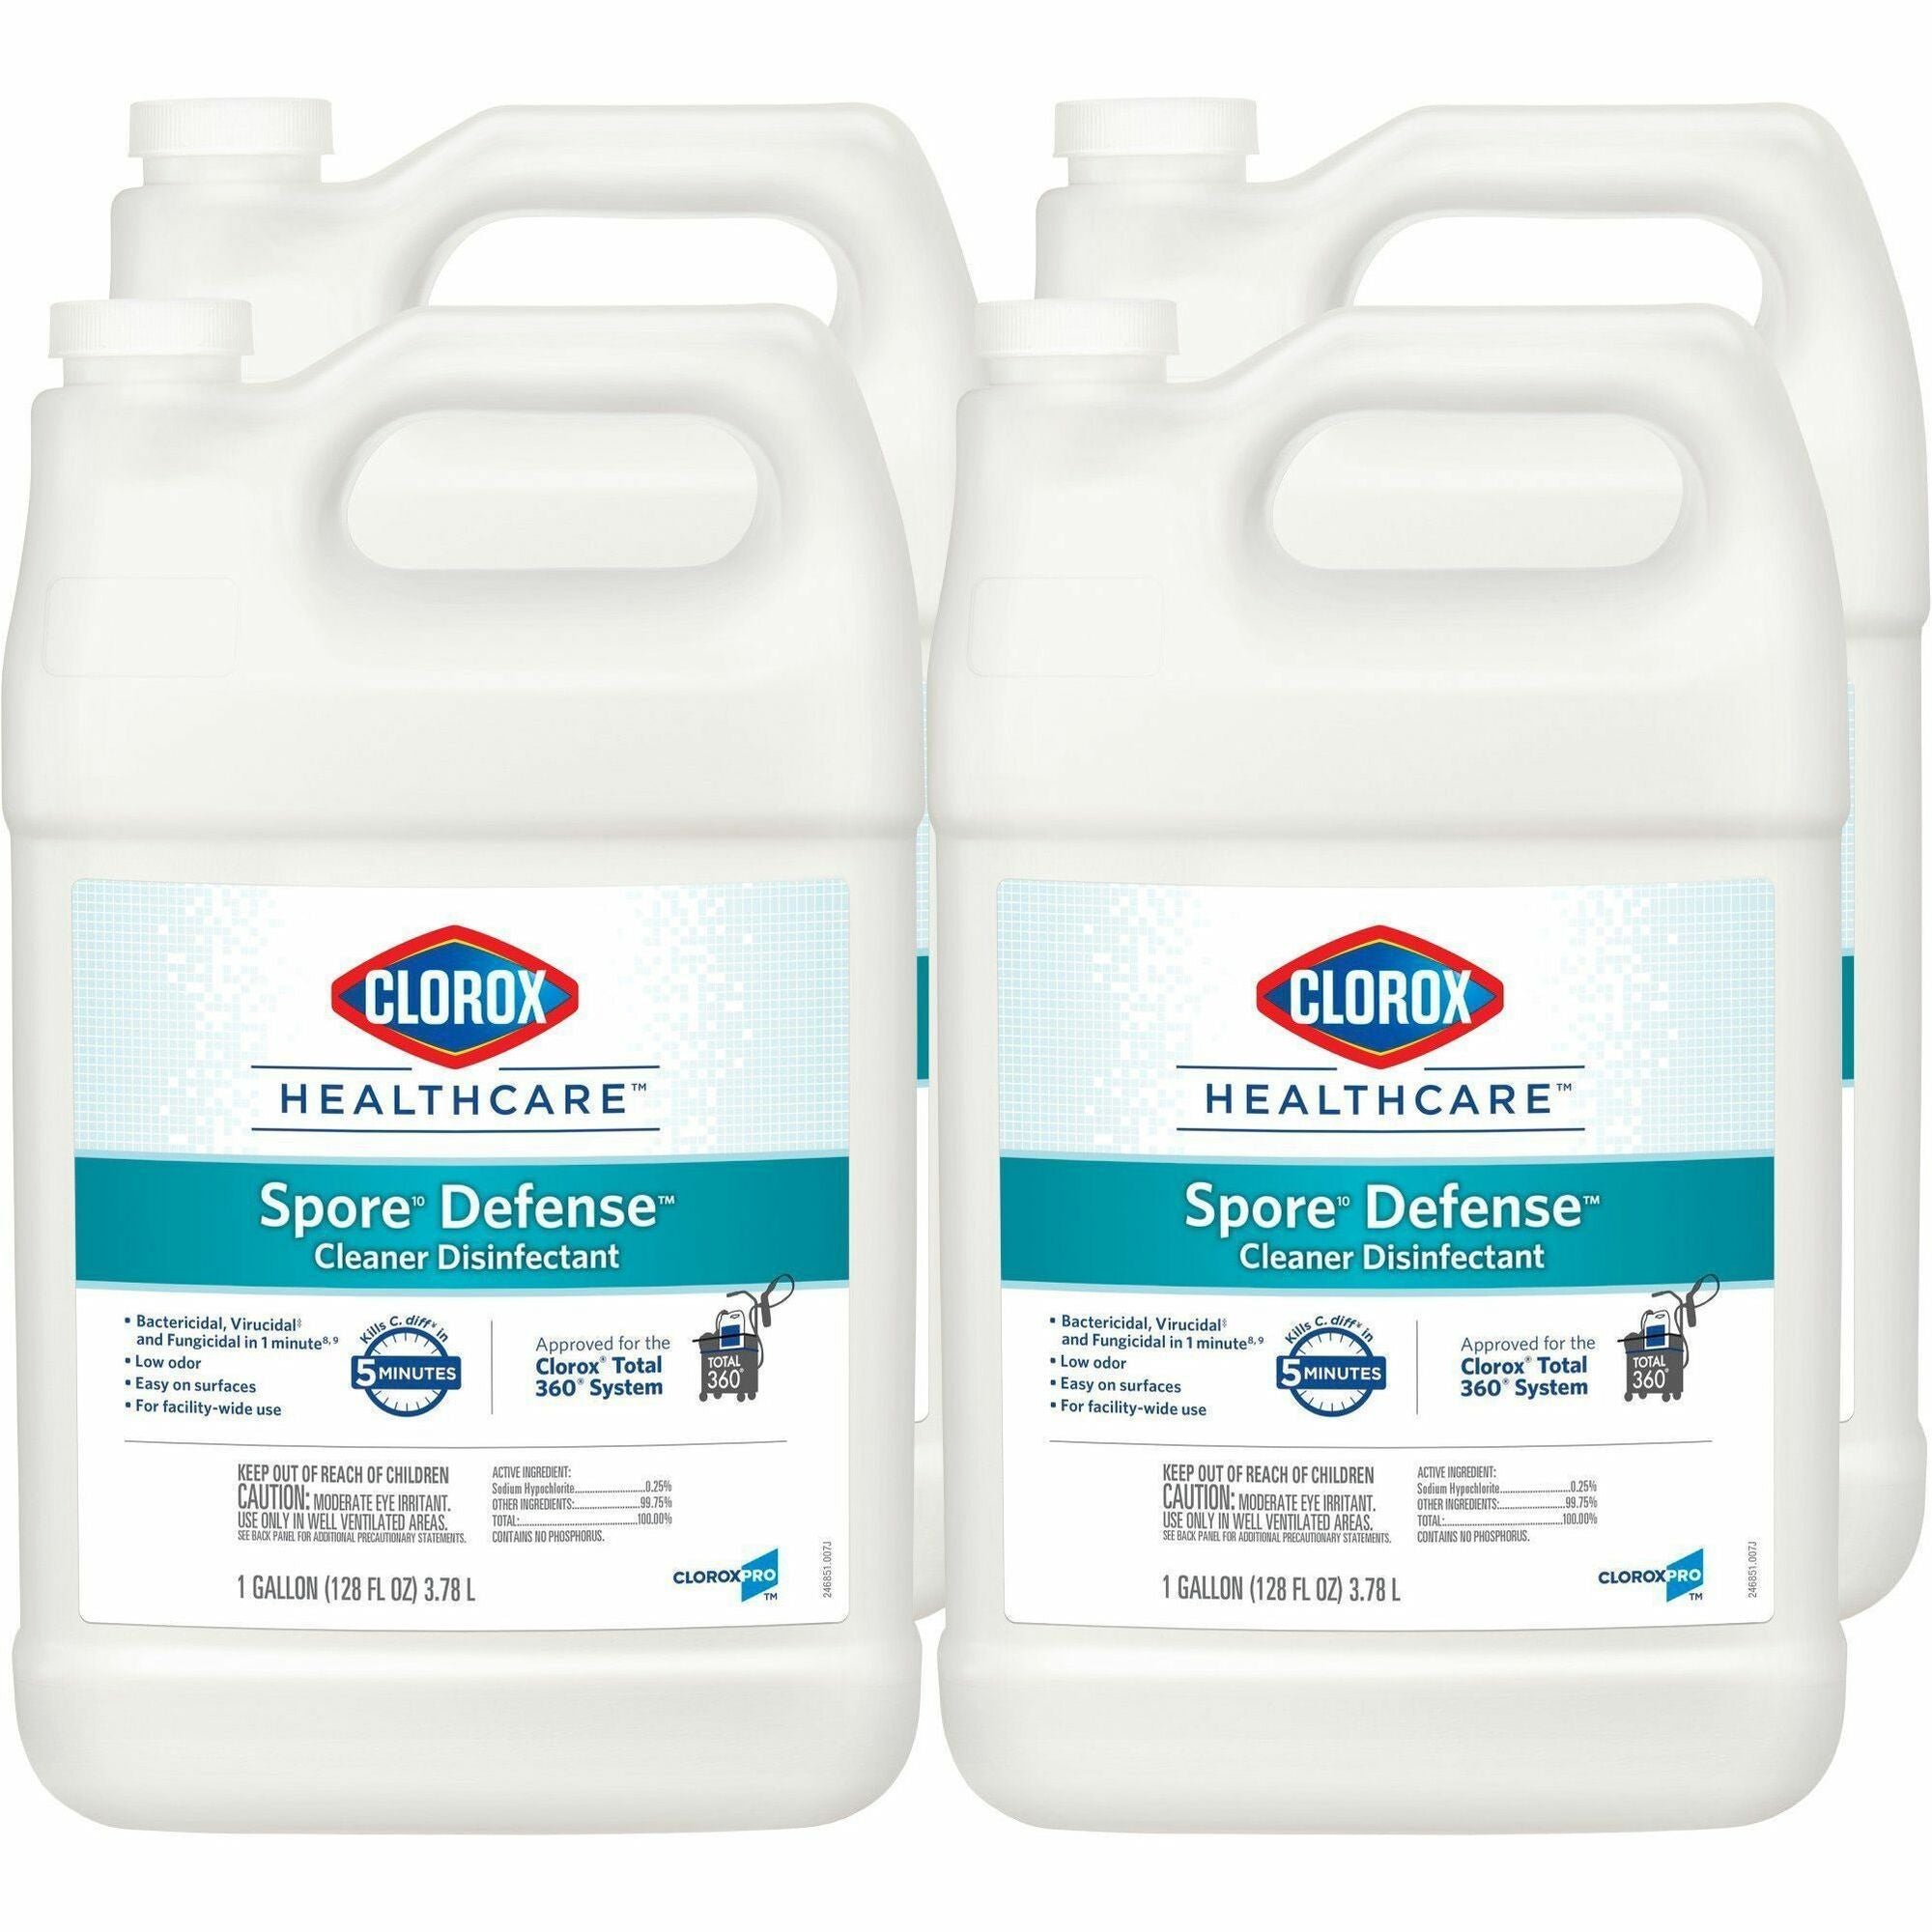 Clorox Healthcare Spore10 Defense Cleaner Disinfectant Refill - Ready-To-Use - 128 fl oz (4 quart)Bottle - 4 / Carton - Low Odor, Fragrance-free - White - 1